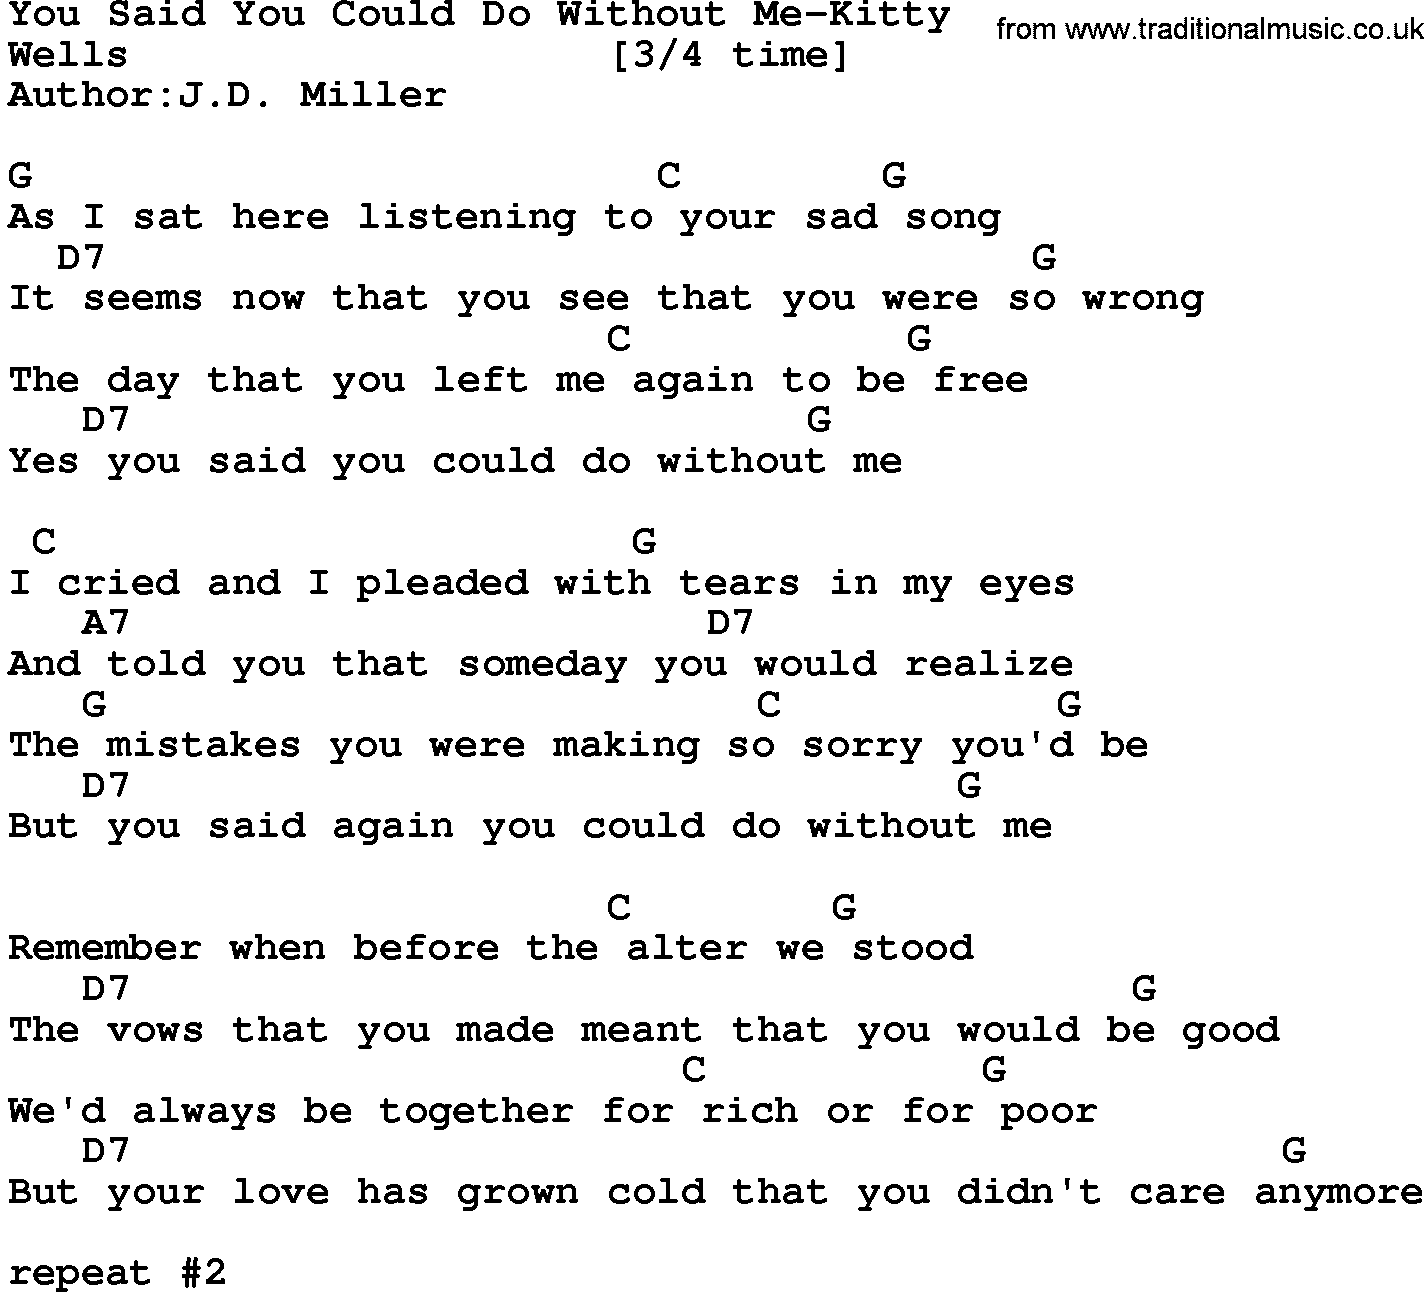 Country music song: You Said You Could Do Without Me-Kitty lyrics and chords